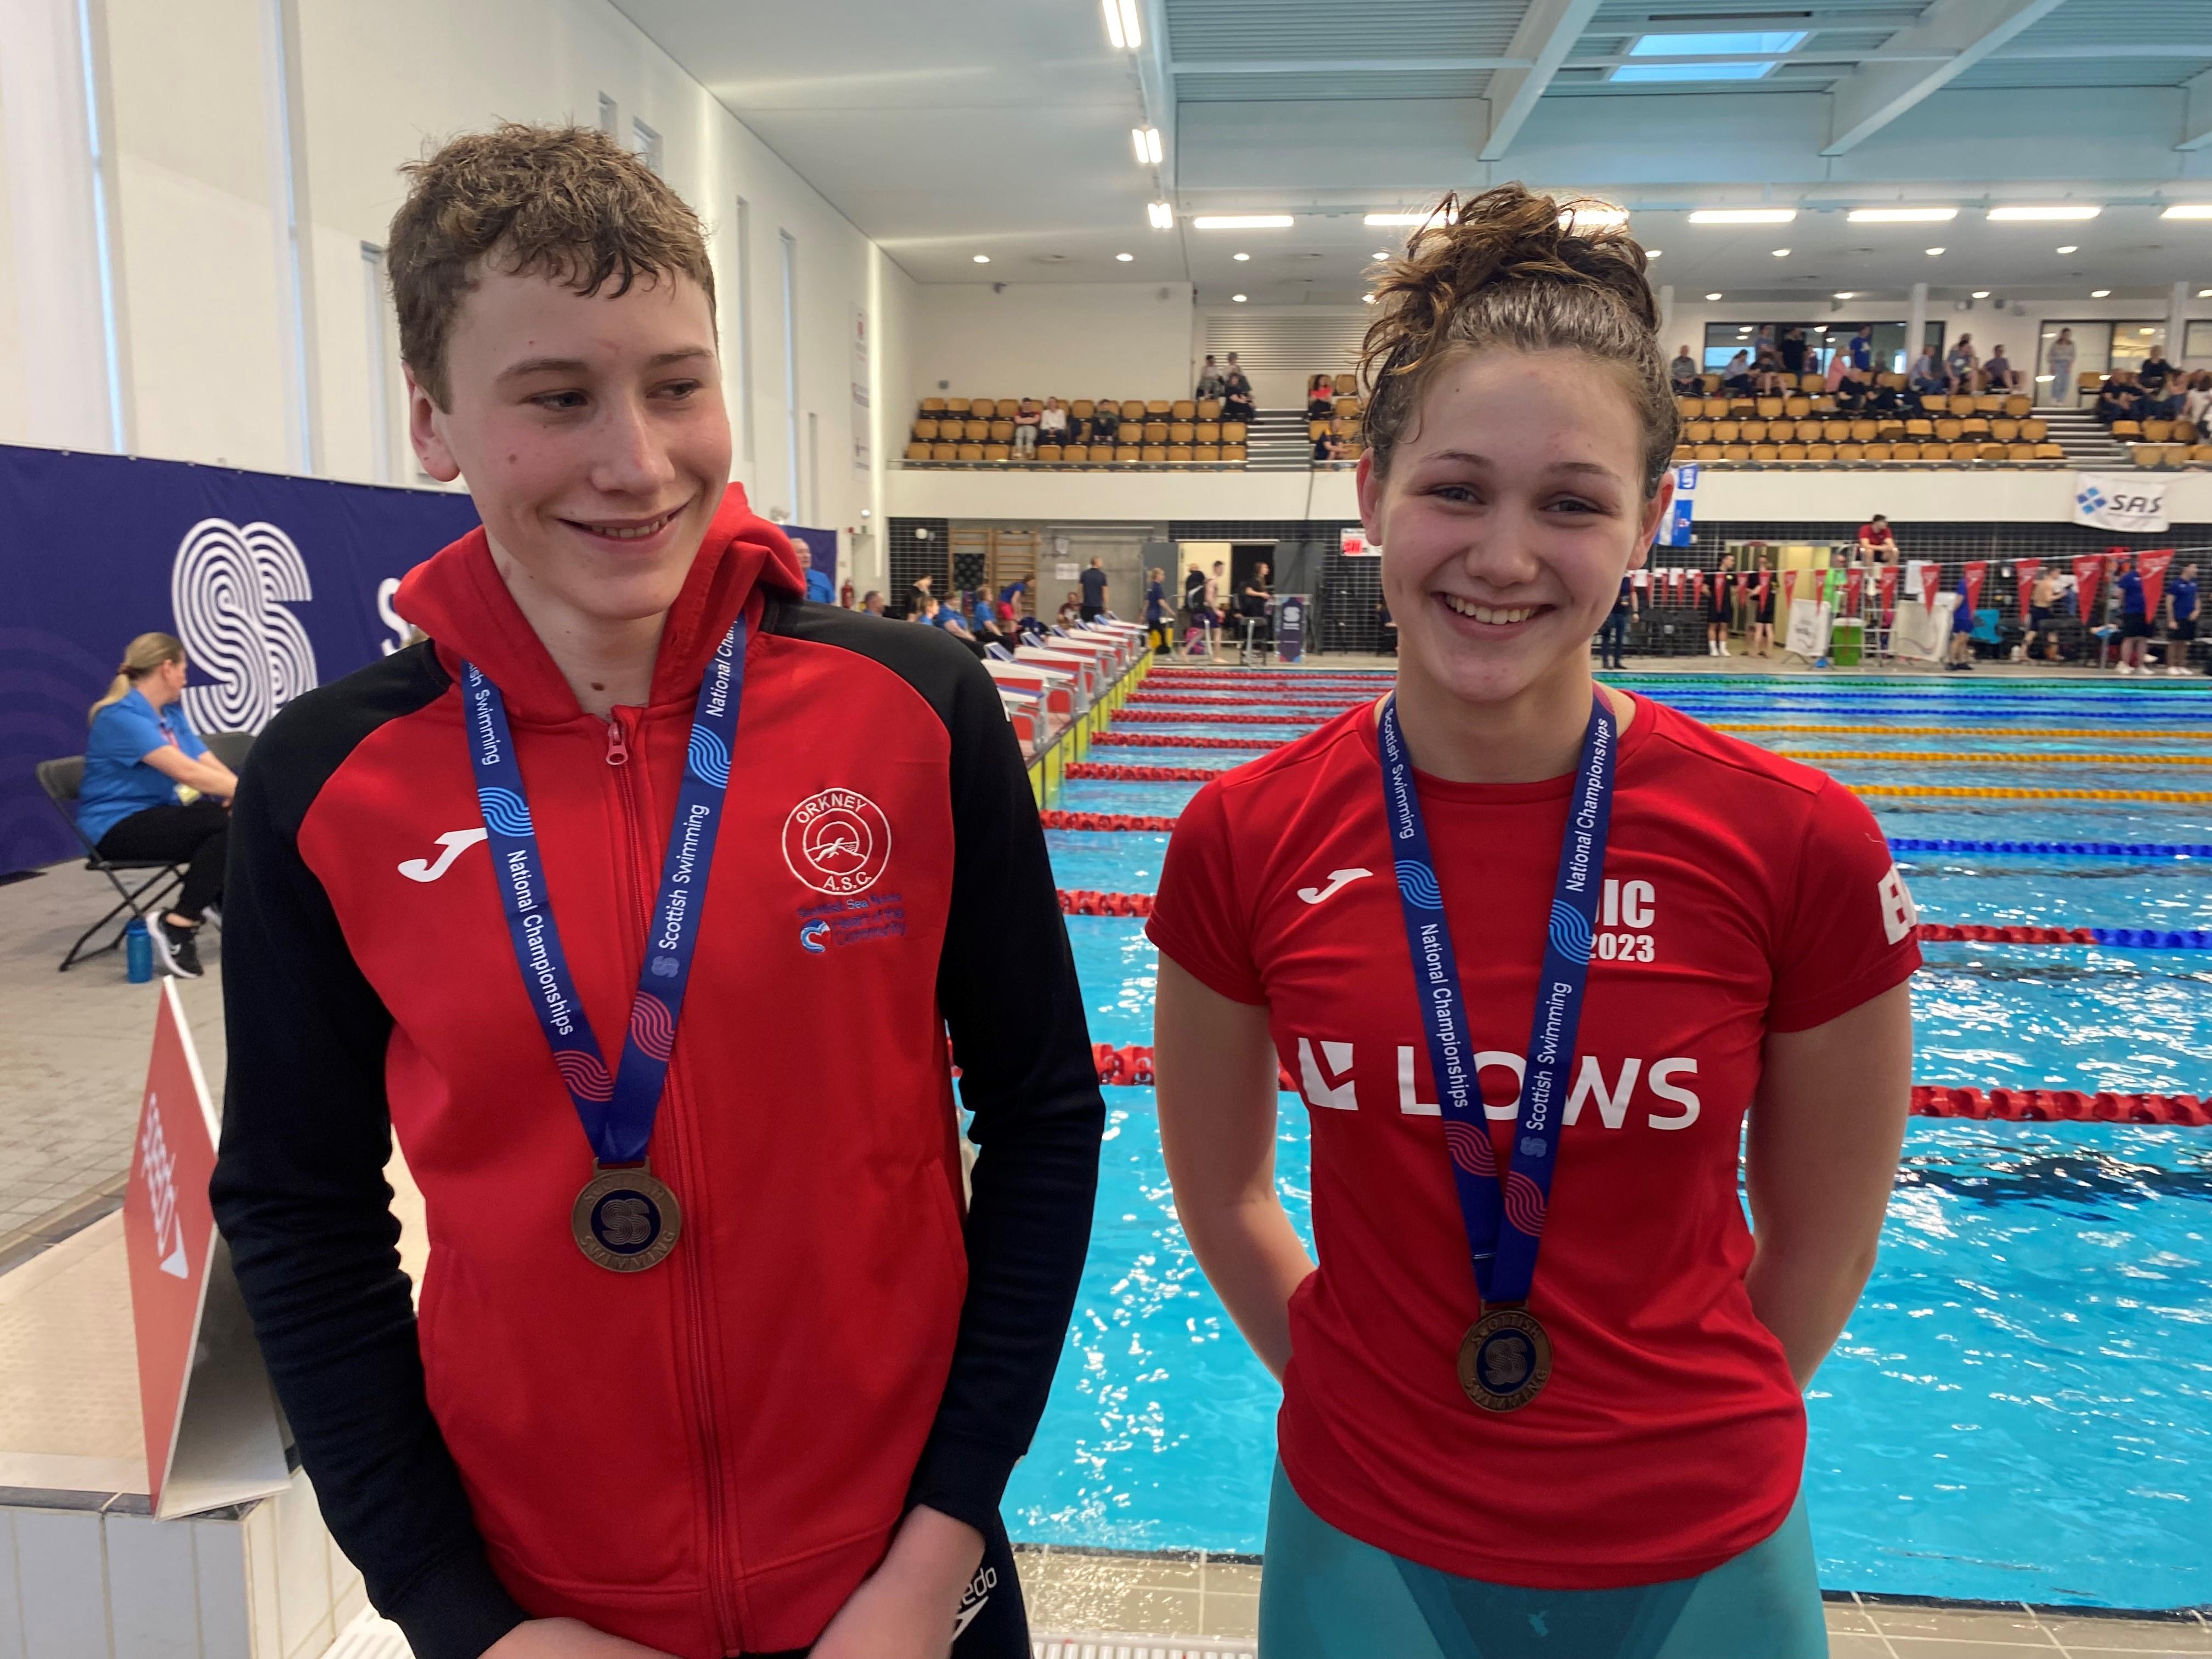 Alfie Price and Eve Wood swimming gold medals